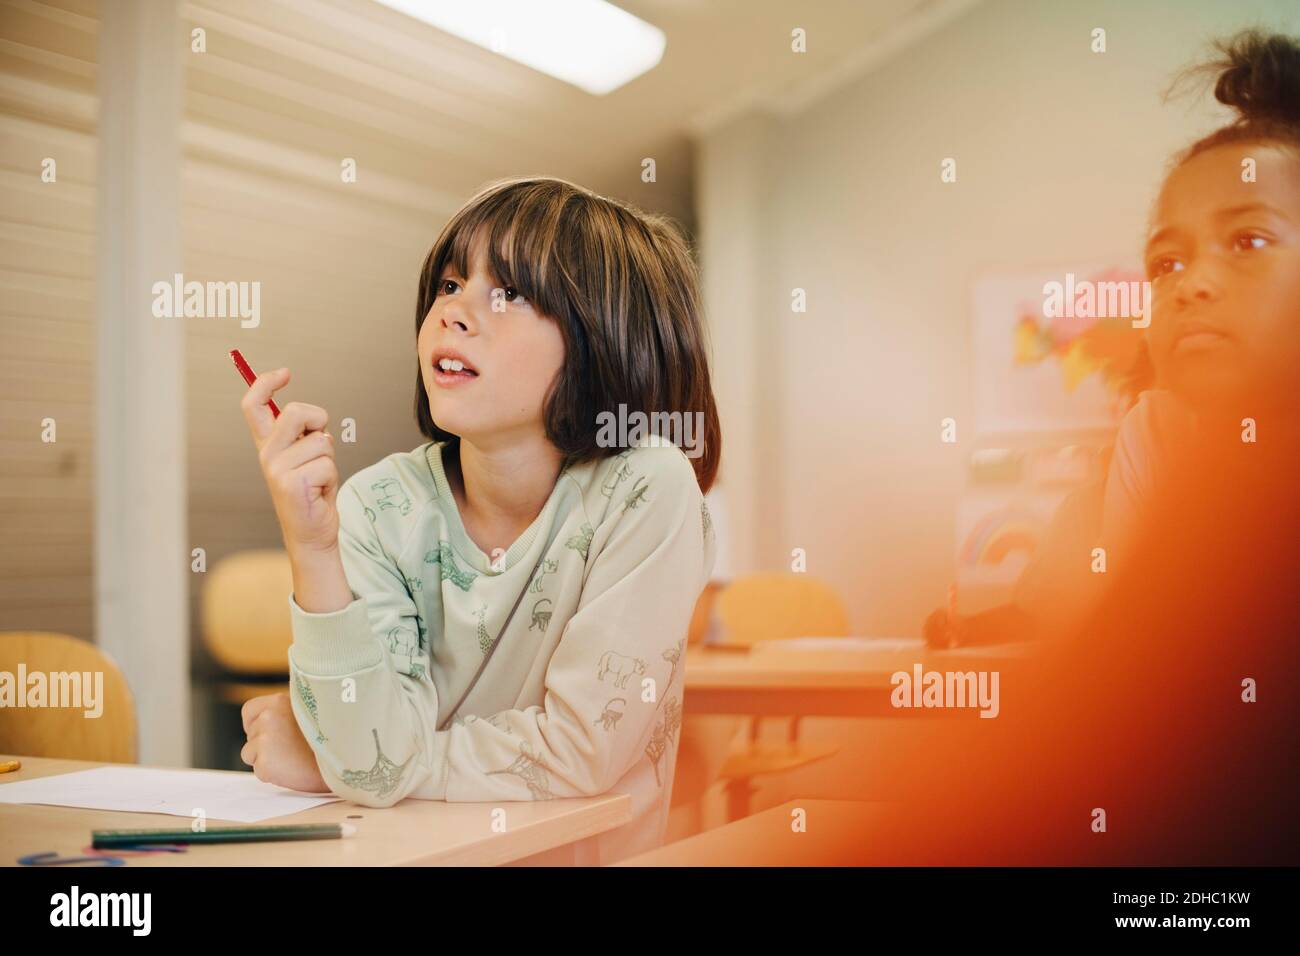 Curious boy sitting at desk while concentrating in classroom Stock Photo